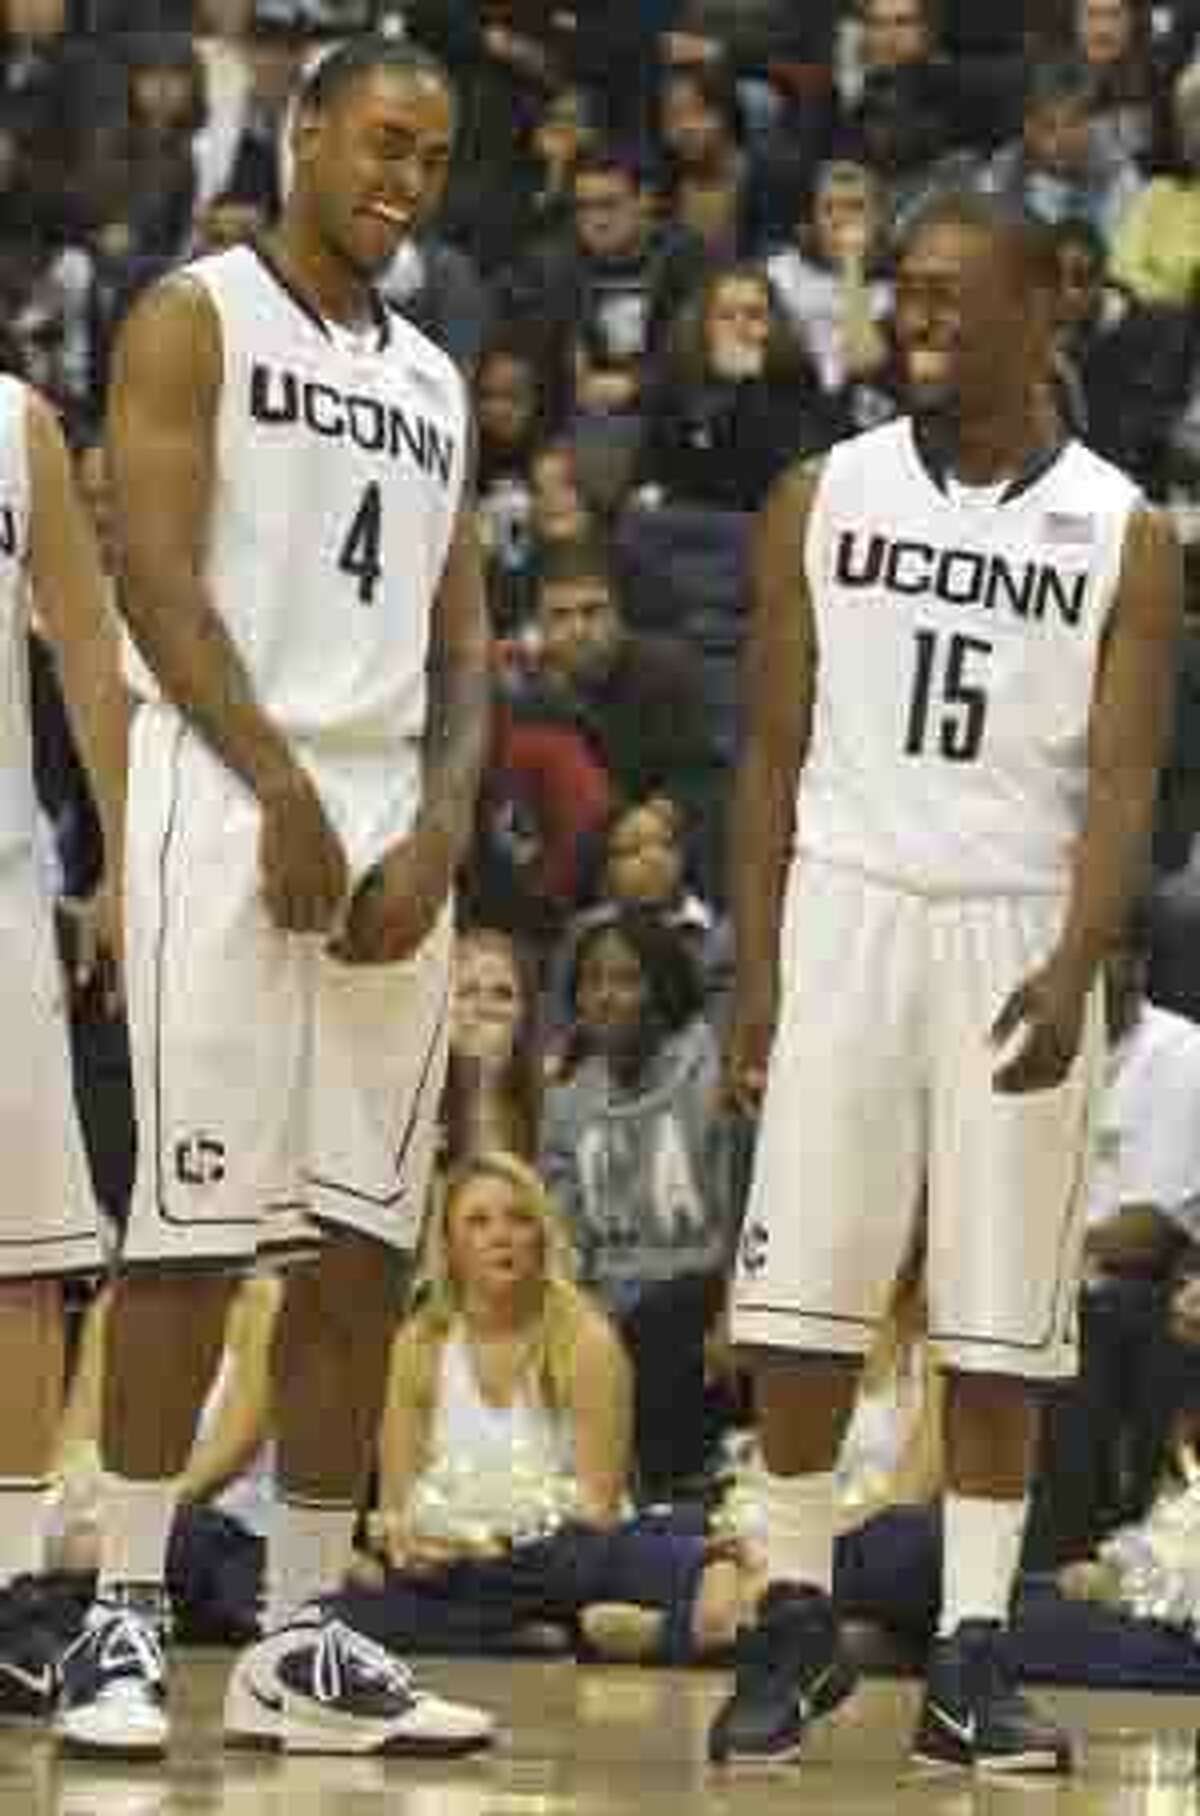 Connecticut's Jamal Coombs-McDaniel, left, and Kemba Walker, right, react during a "Simon Says" competition at the First Night NCAA college basketball exhibition, in Storrs, Conn., Friday, Oct. 15, 2010. (AP Photo/Jessica Hill)